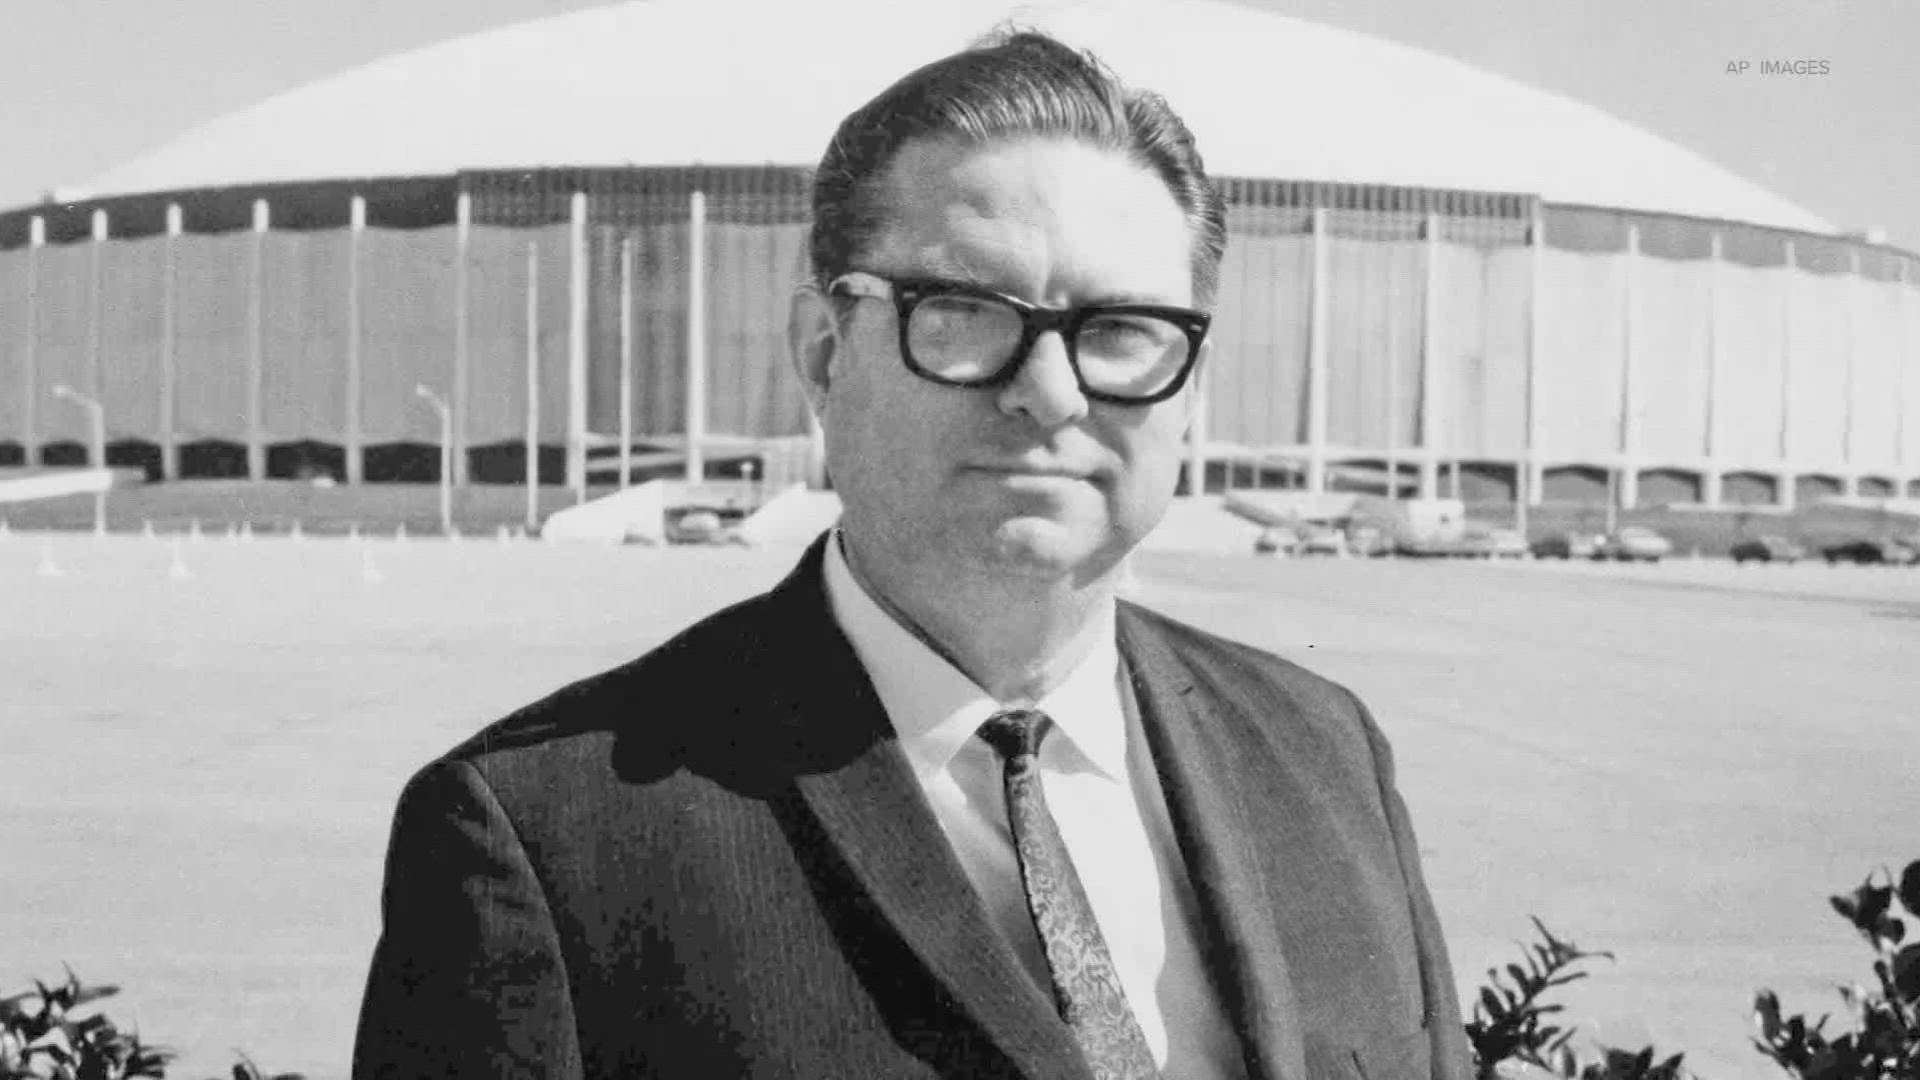 The legendary Judge Roy Hofheinz will be inducted into the Astros Hall of Fame. KHOU 11's Ron Trevino spoke with the icon's grandson.